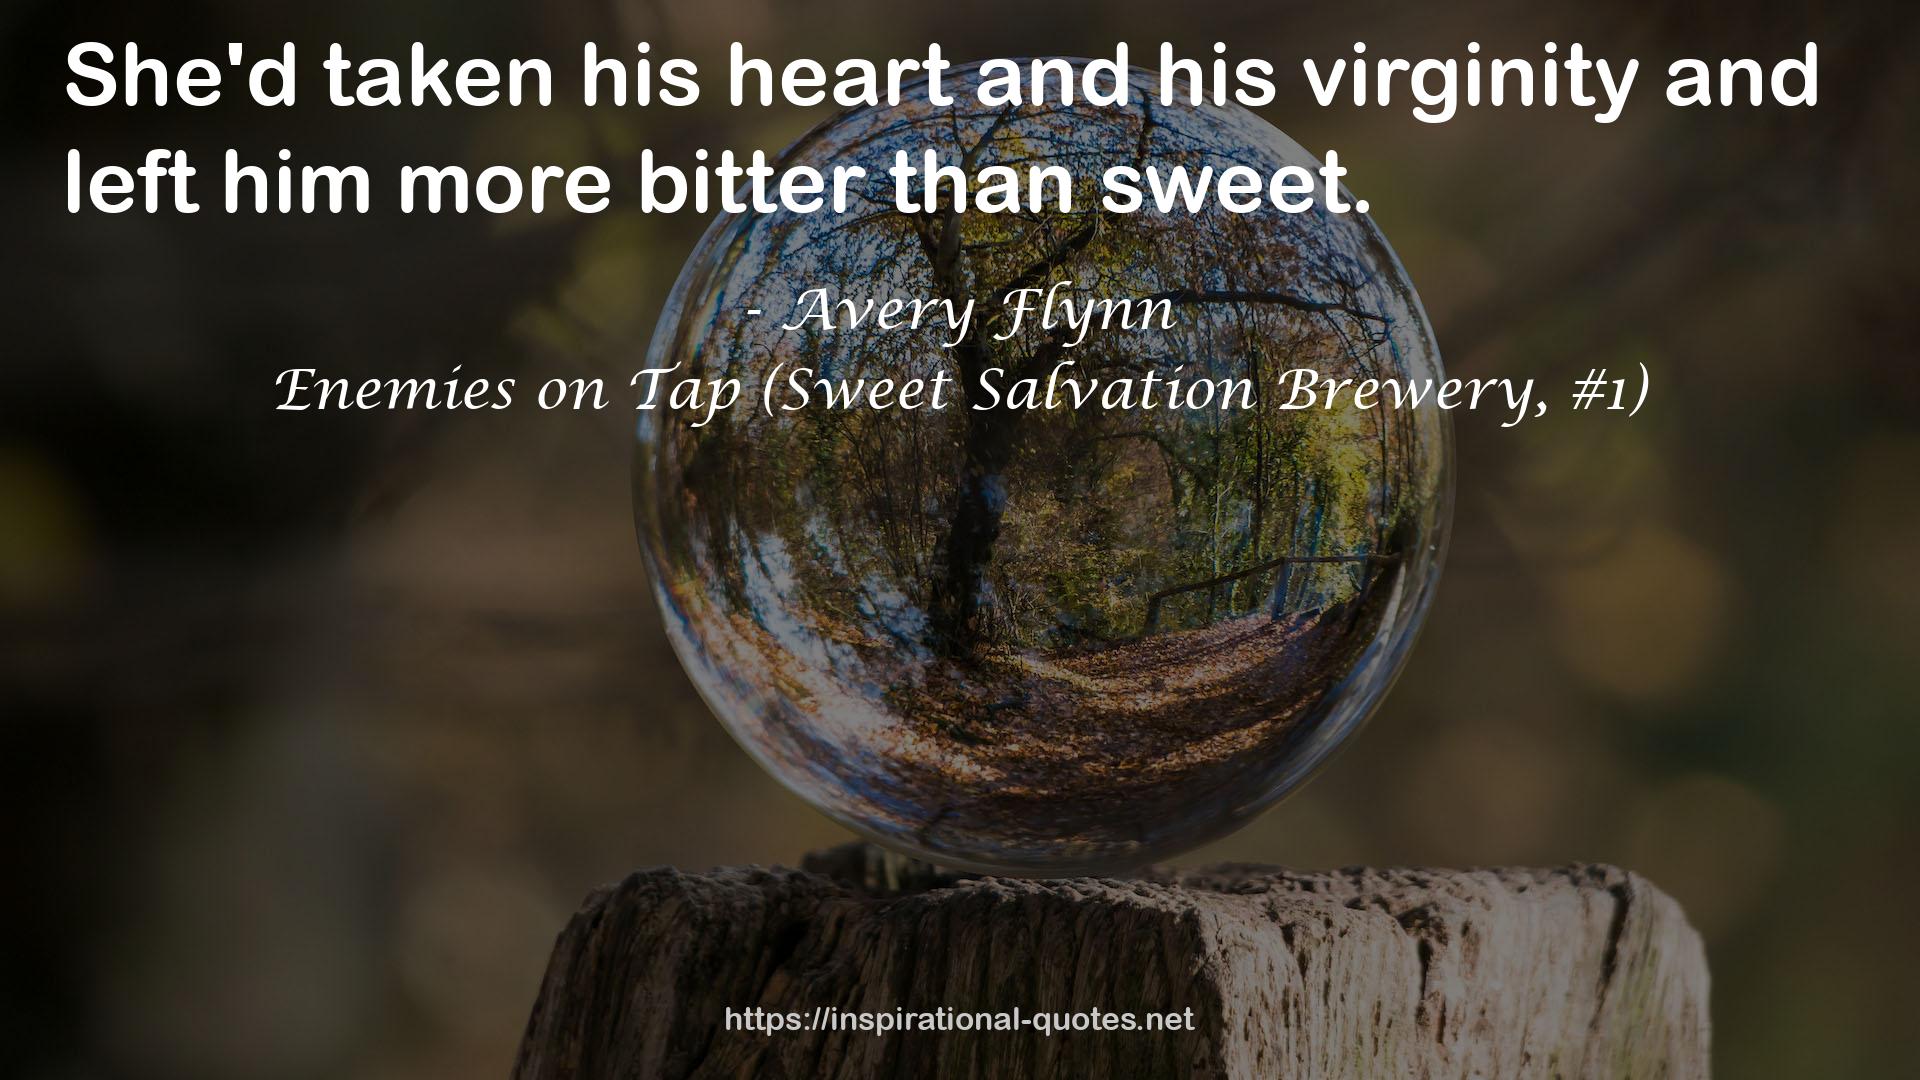 Enemies on Tap (Sweet Salvation Brewery, #1) QUOTES